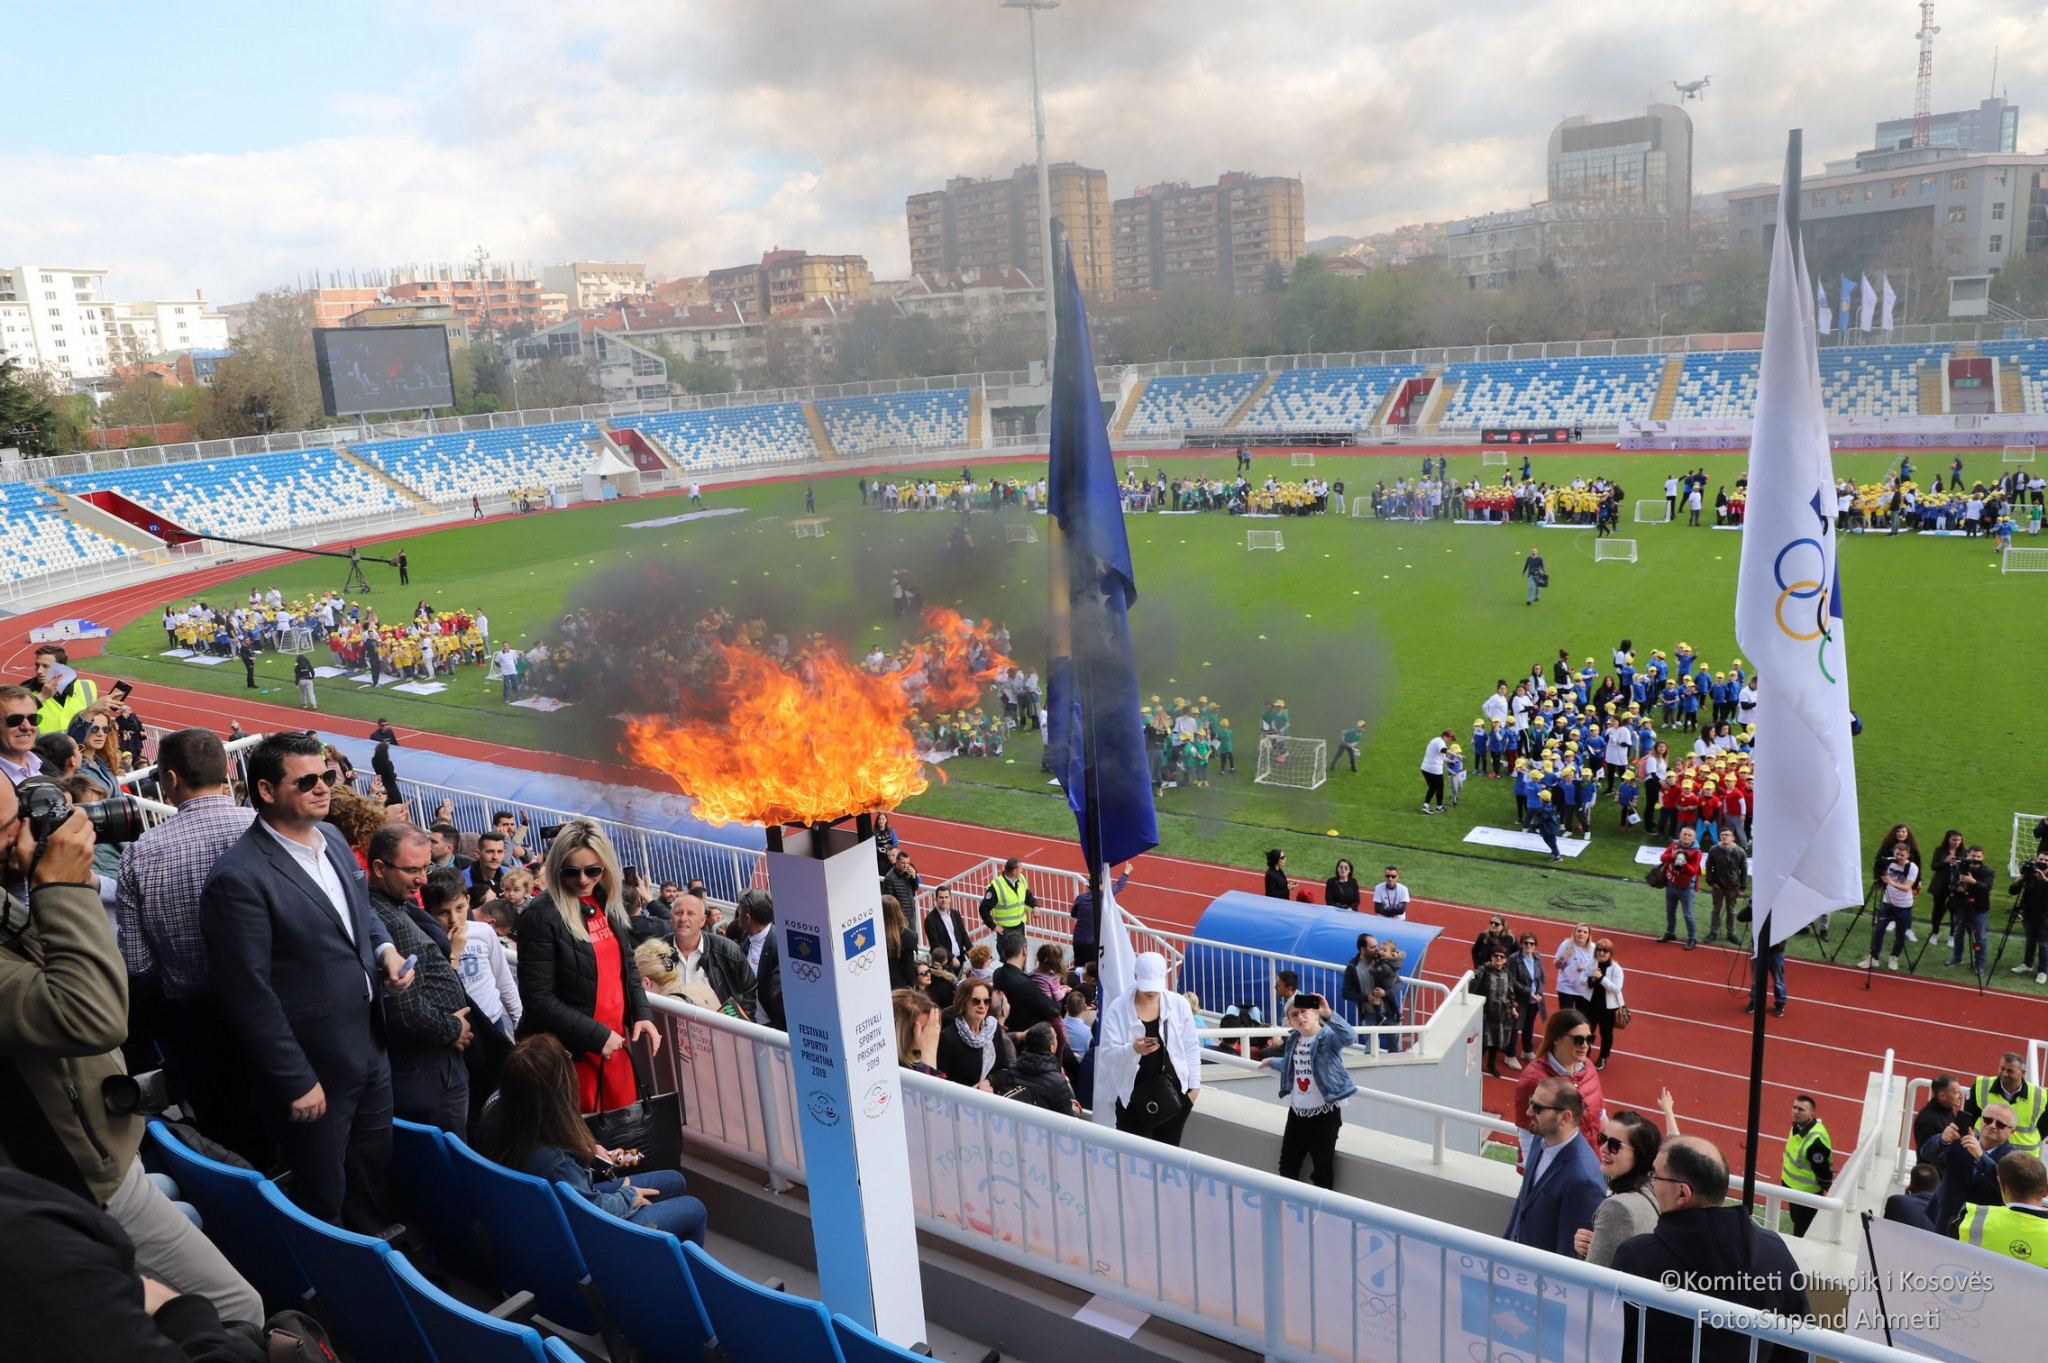 Two thousand pre-school children got an Olympic experience at Pristina's Fadil Vokrri Stadium in an event organised by the Kosovo National Olympic Committee ©Kosovo Olympic Committee